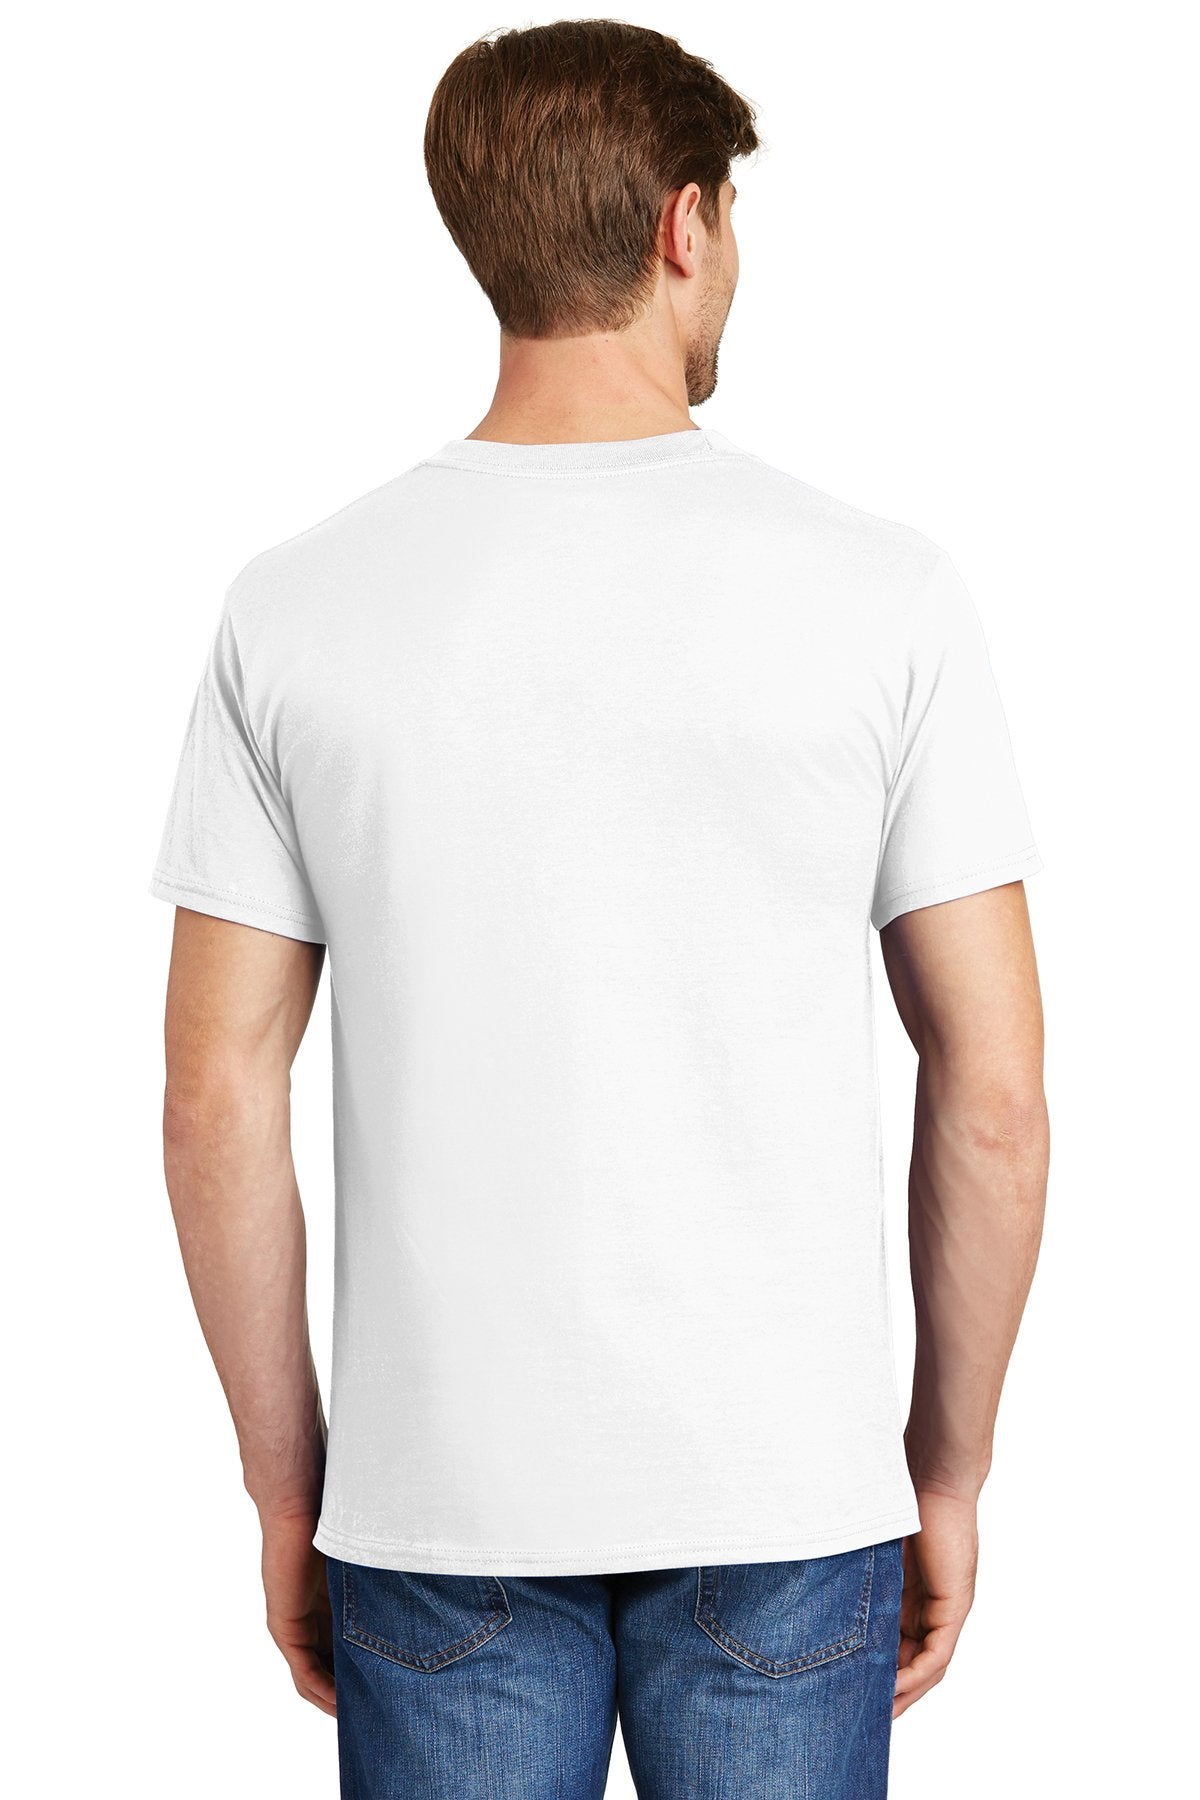 hanes beefy cotton t shirt with pocket 5190 white